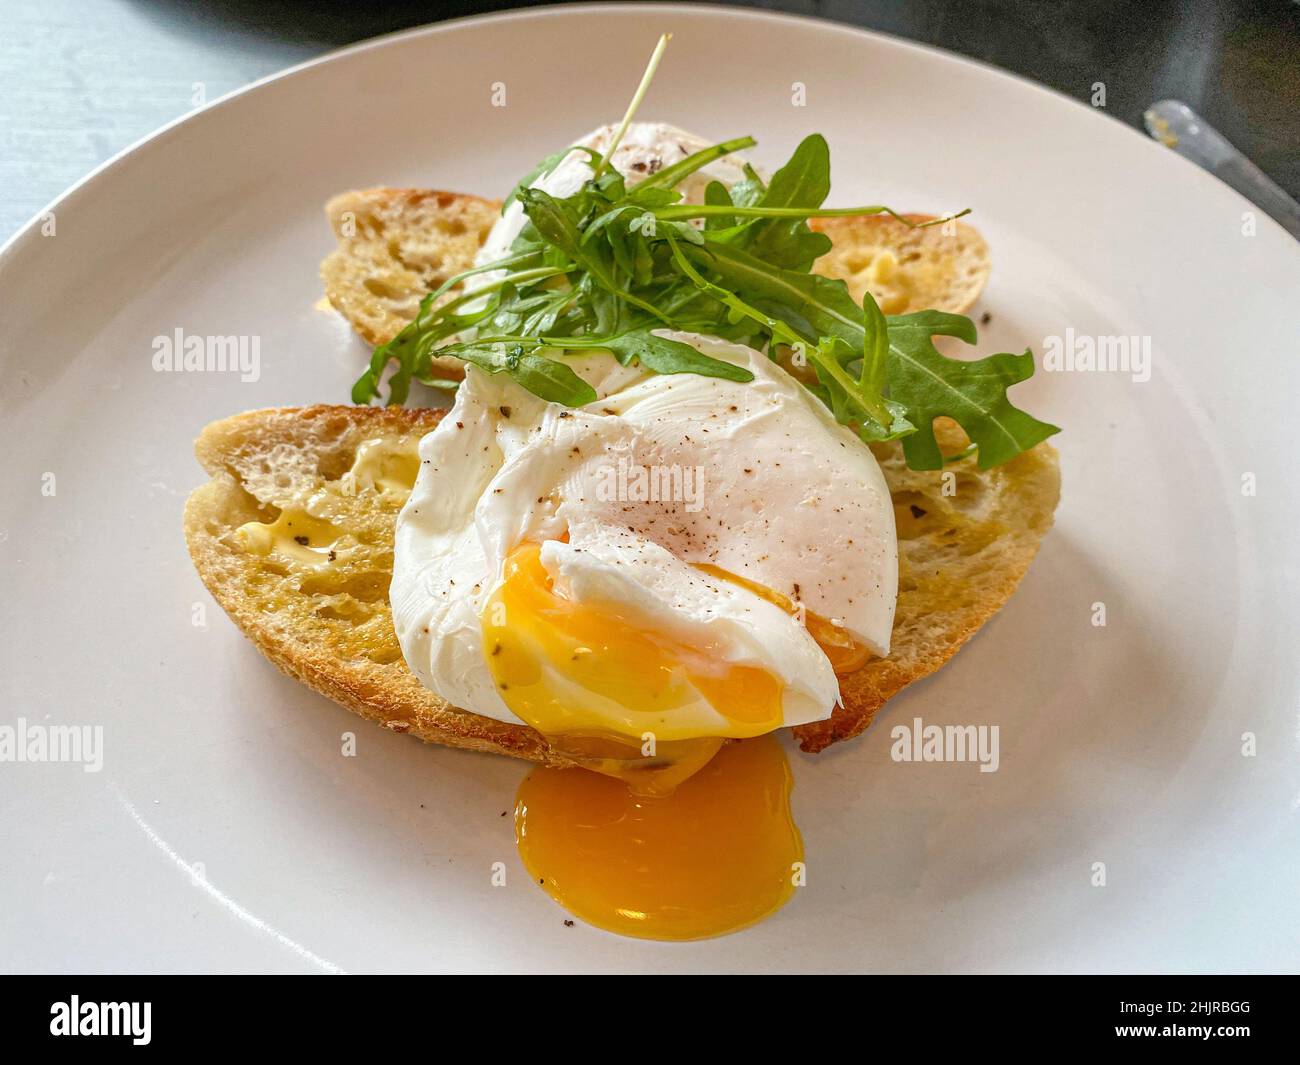 Poached eggs on toasted bread Stock Photo